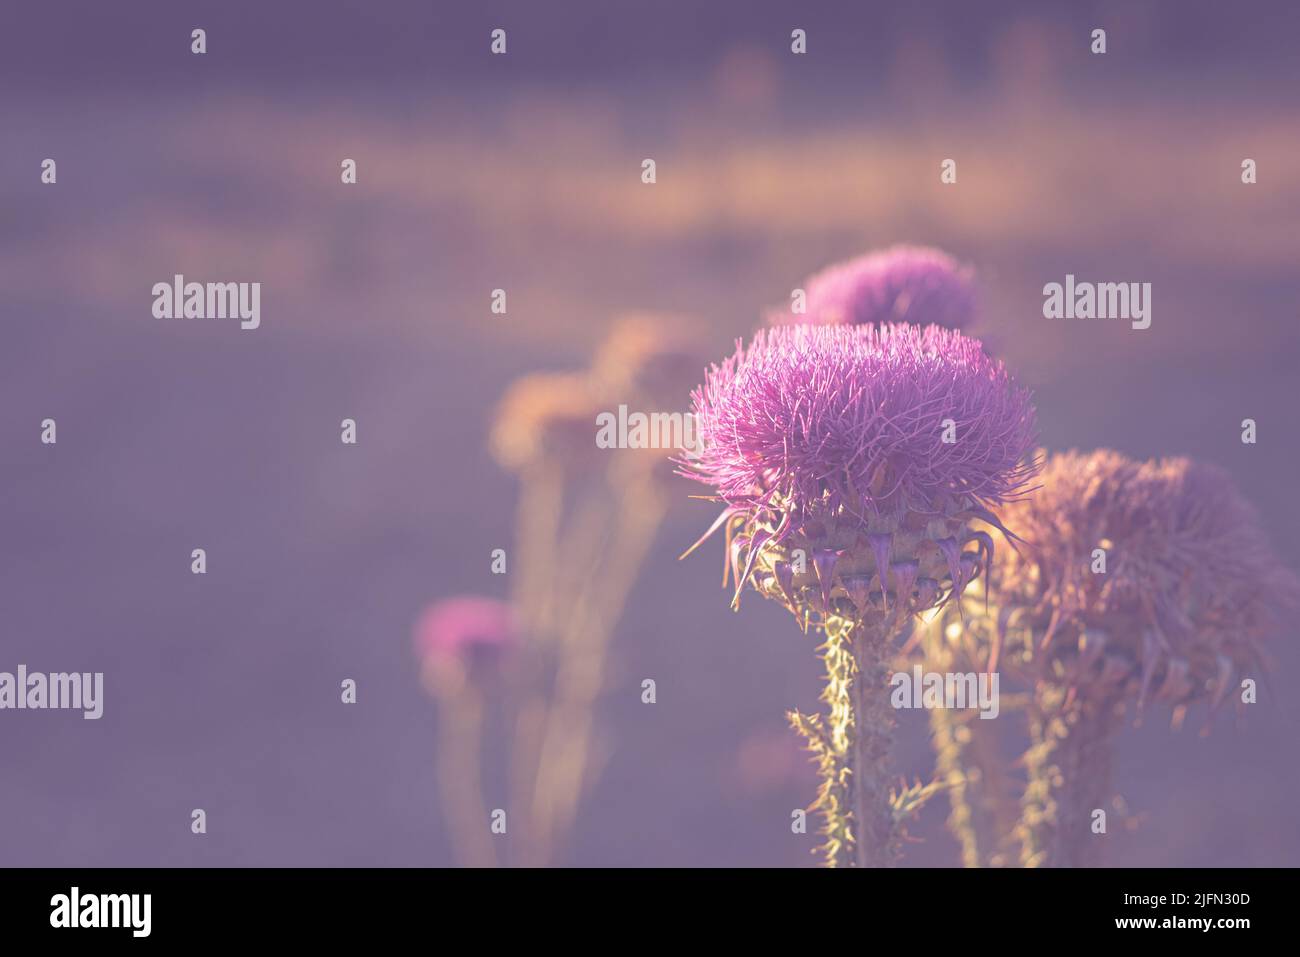 Blooming (flowering) thistle. Soft view and background with Cotton Thistle (Onopordum acanthium). Stock Photo